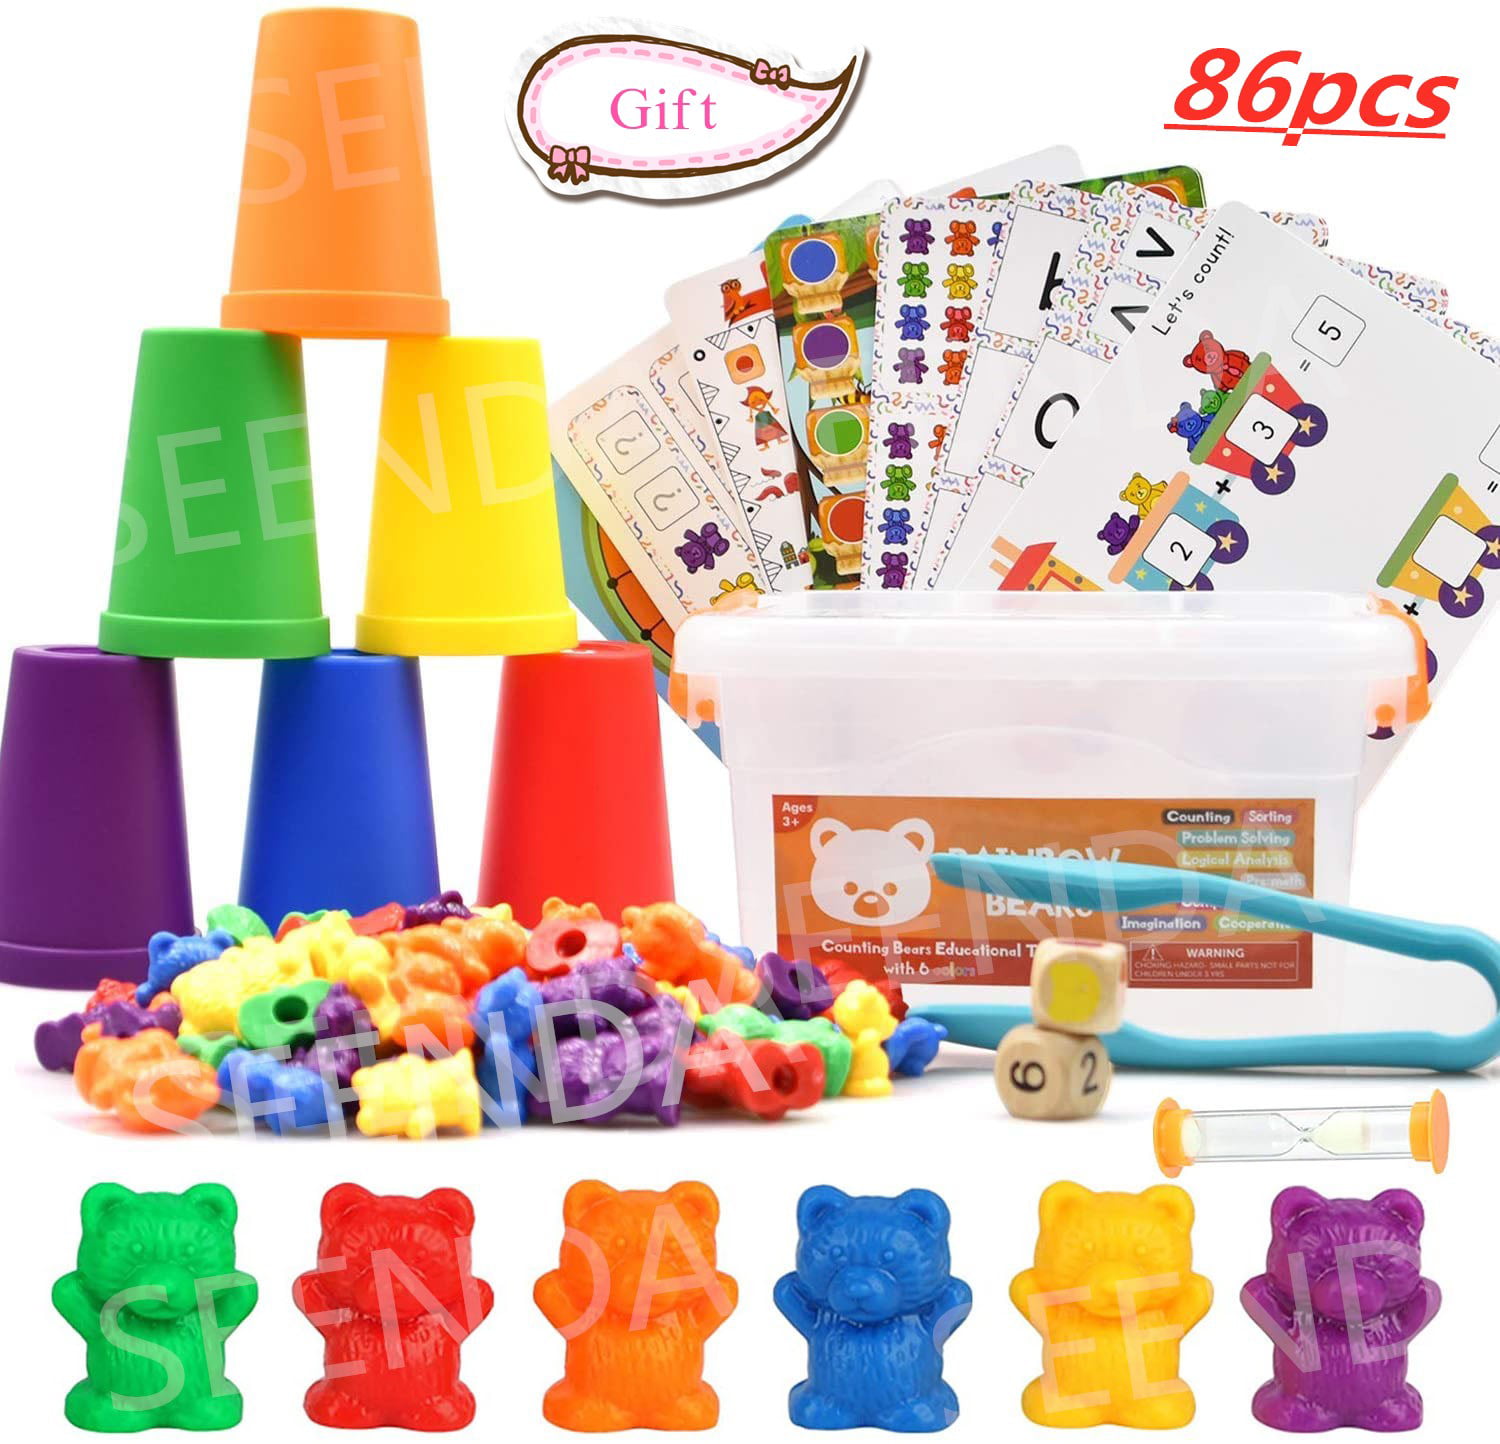 Details about   Rainbow Counting Bears Matching Sorting Kids Toddlers Educational Toys 